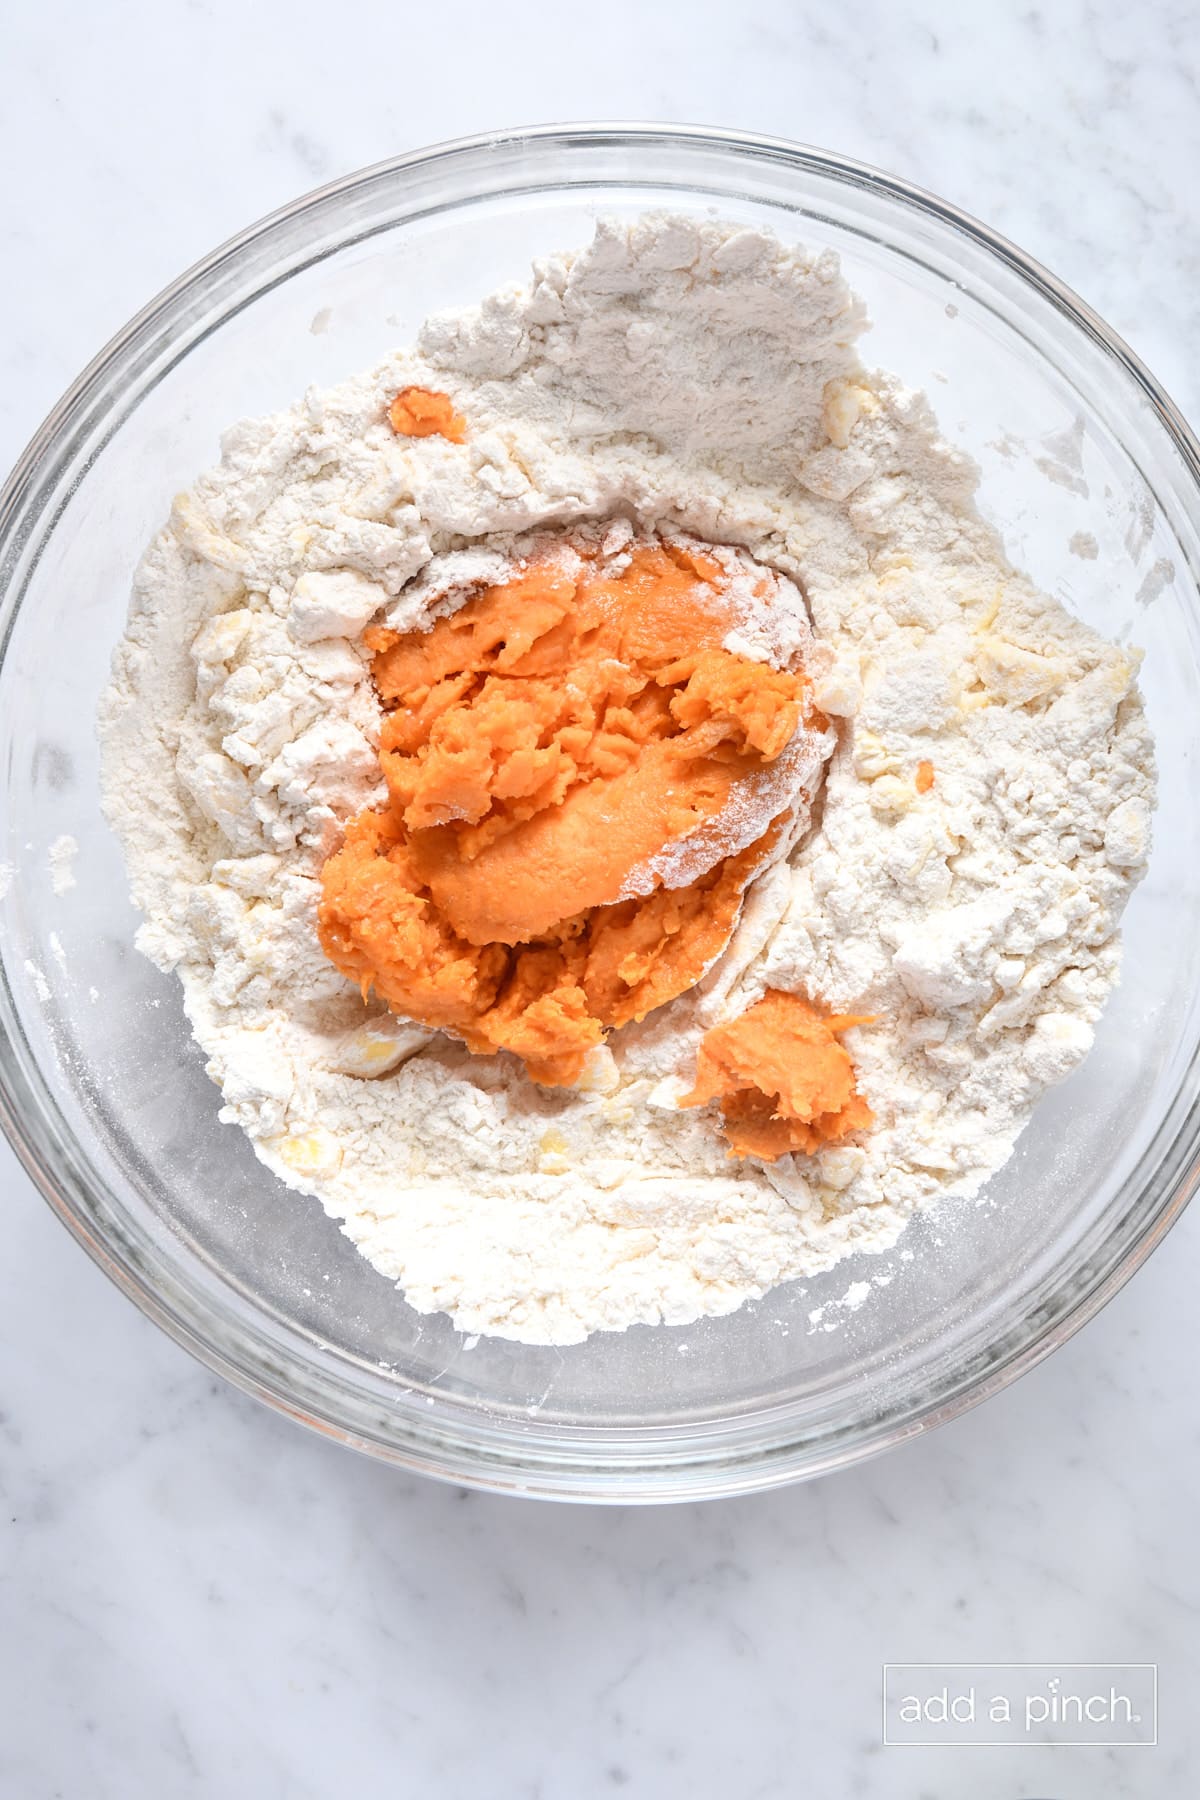 Mashed sweet potato added to flour mixture in a glass mixing bowl on a marble surface.